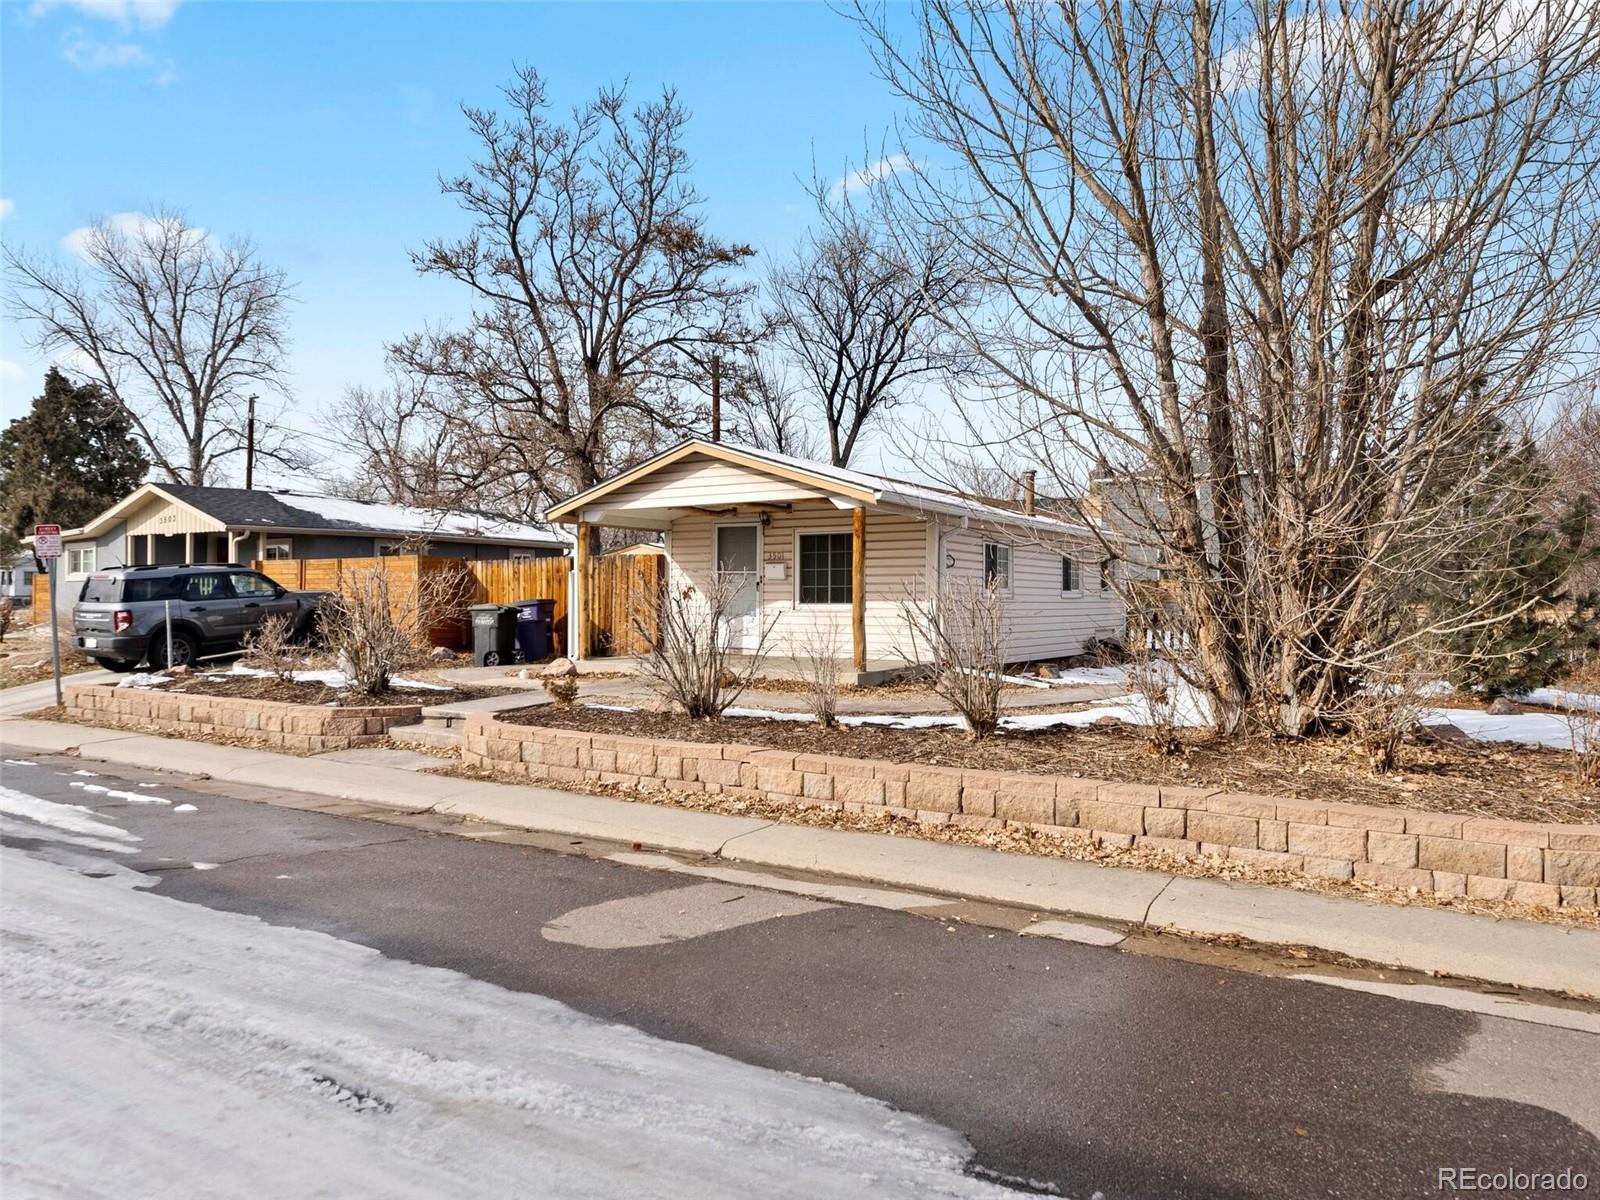 3501 w 48th avenue, Denver sold home. Closed on 2024-02-23 for $305,000.